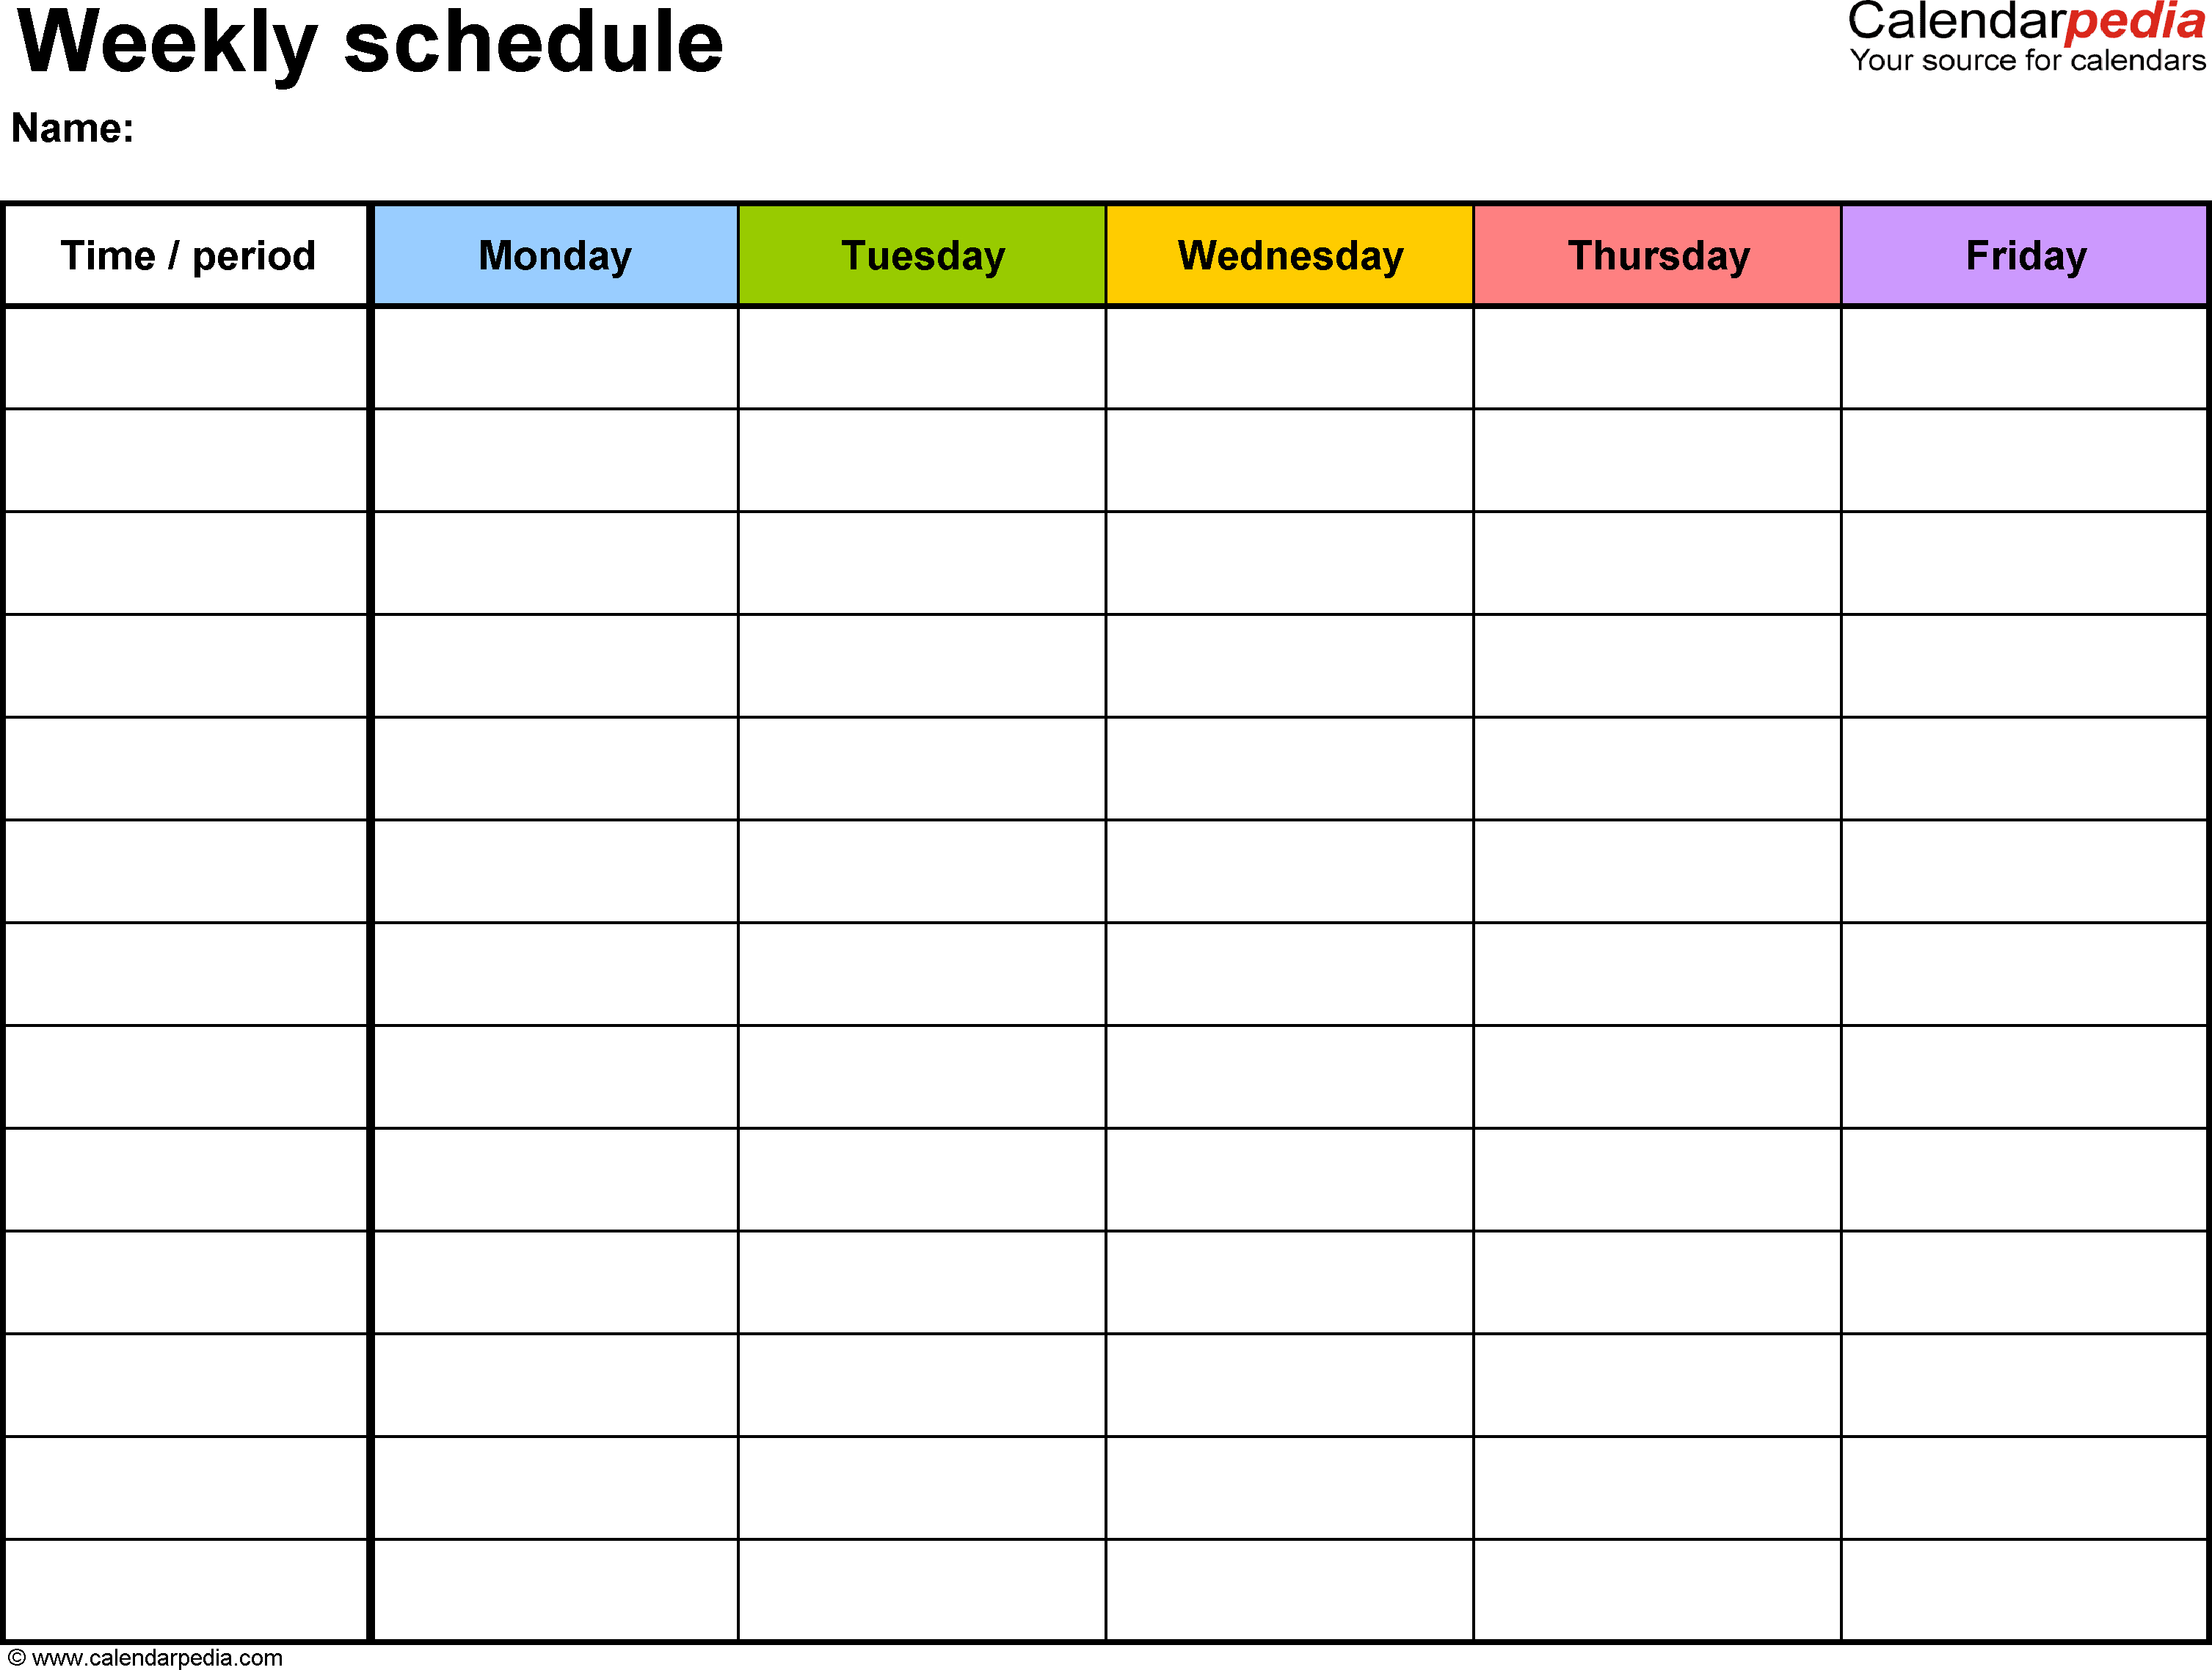 daily appointment schedule template free